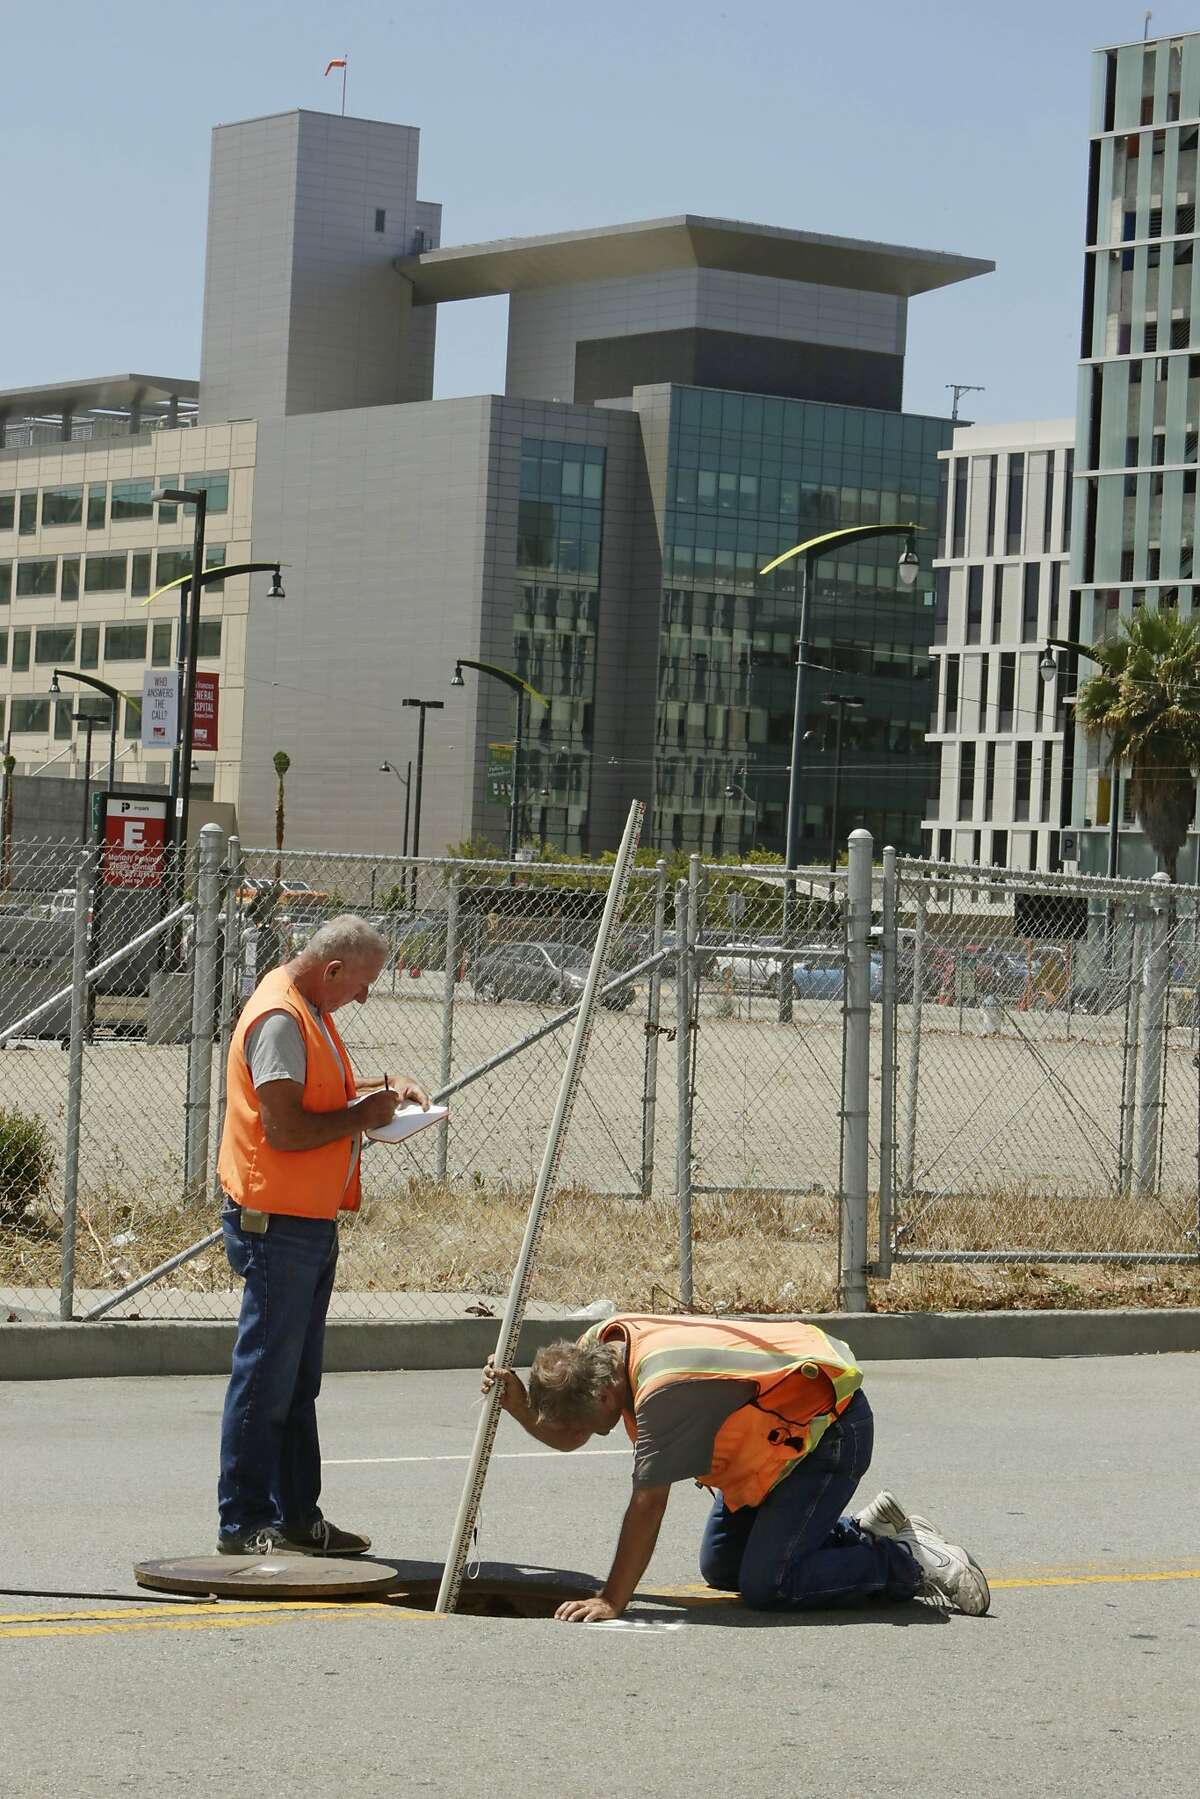 Land surveyors John Seace (l to r) and Frank Montemurro, both of John Seace Land Surveying, work on South Street next to the site of the proposed Golden Gate Warriors arena on Monday, July 27, 2015 in San Francisco, Calif. In the background is seen the UCSF Medical Center at Mission Bay.